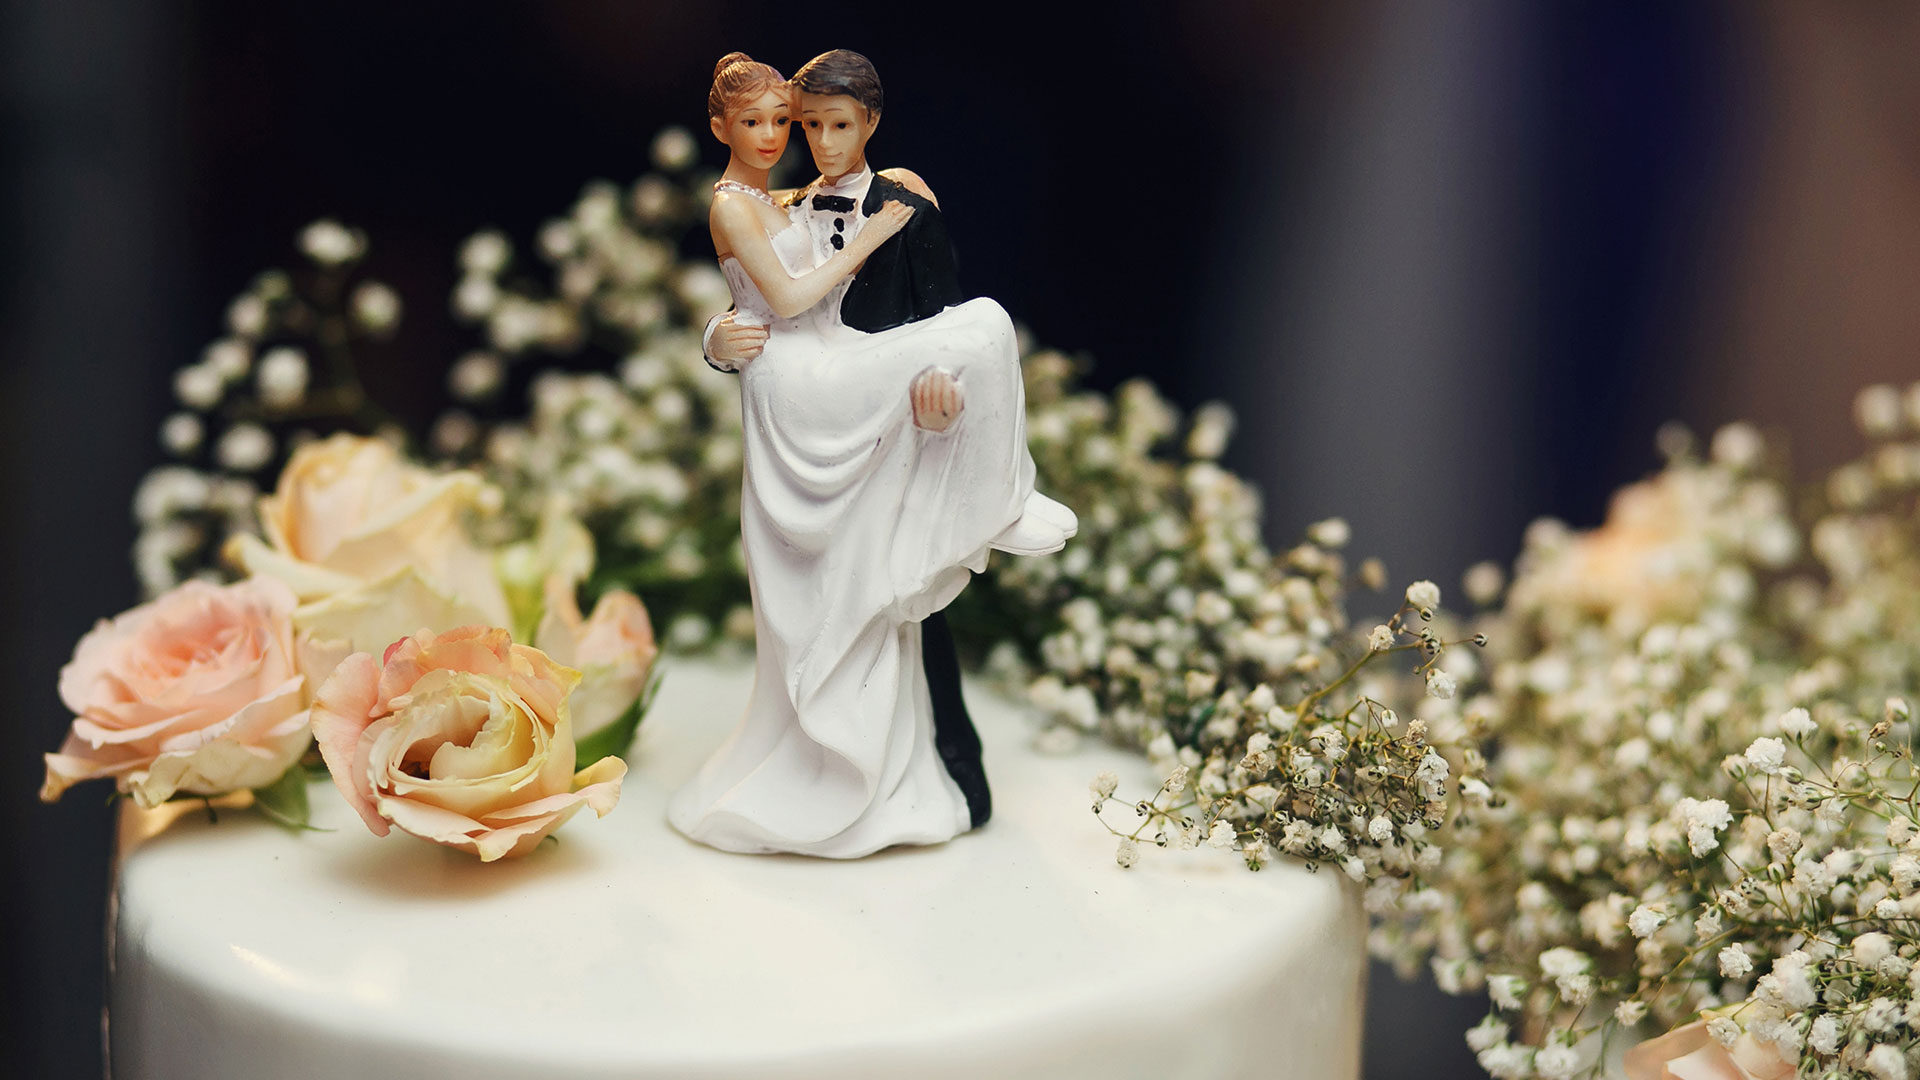 Wedding cake toppers of man and wife on top of cake